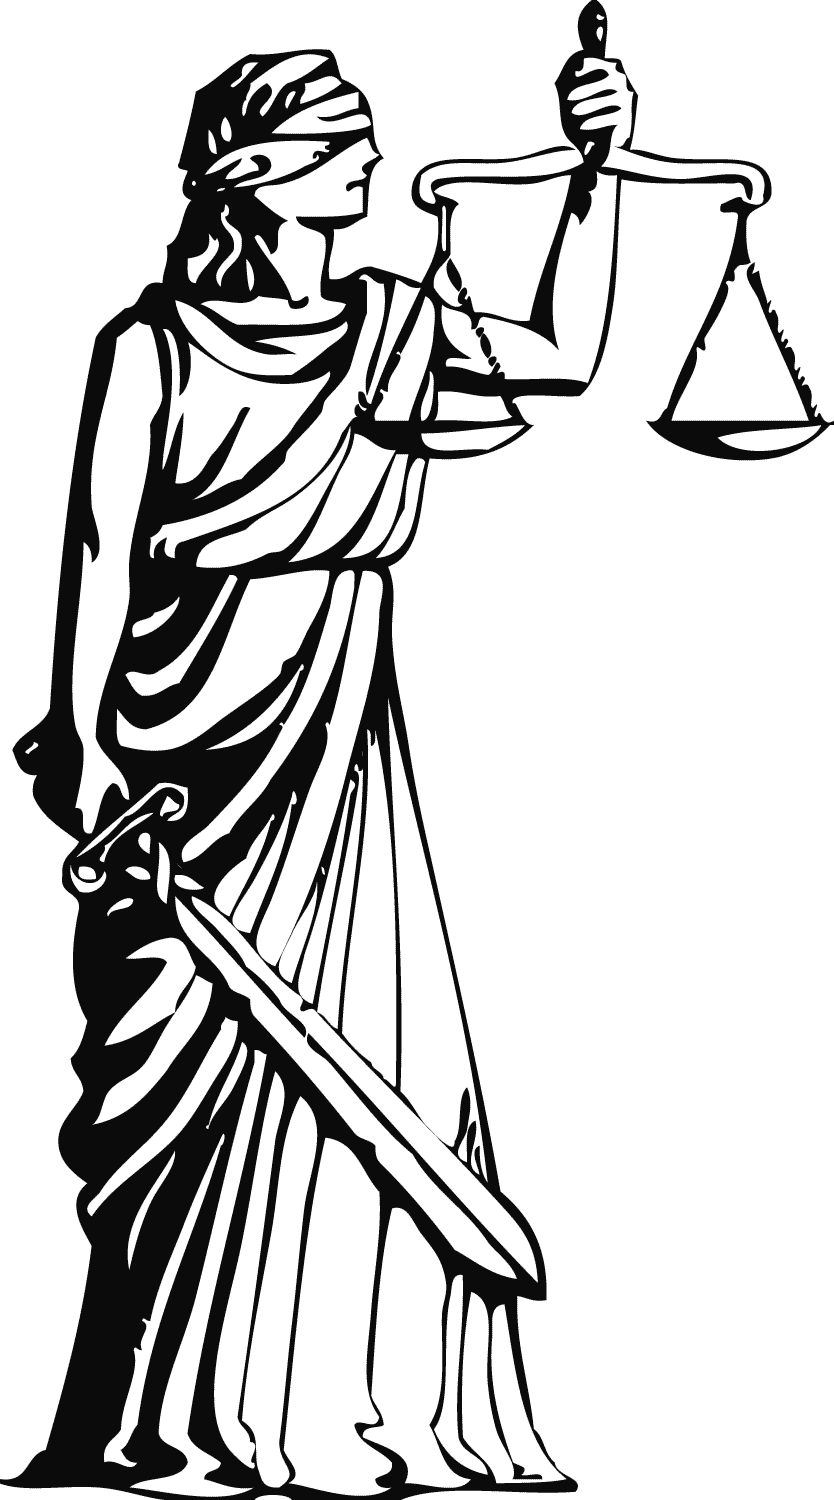 Why not get judgement. Gavel clipart sketch